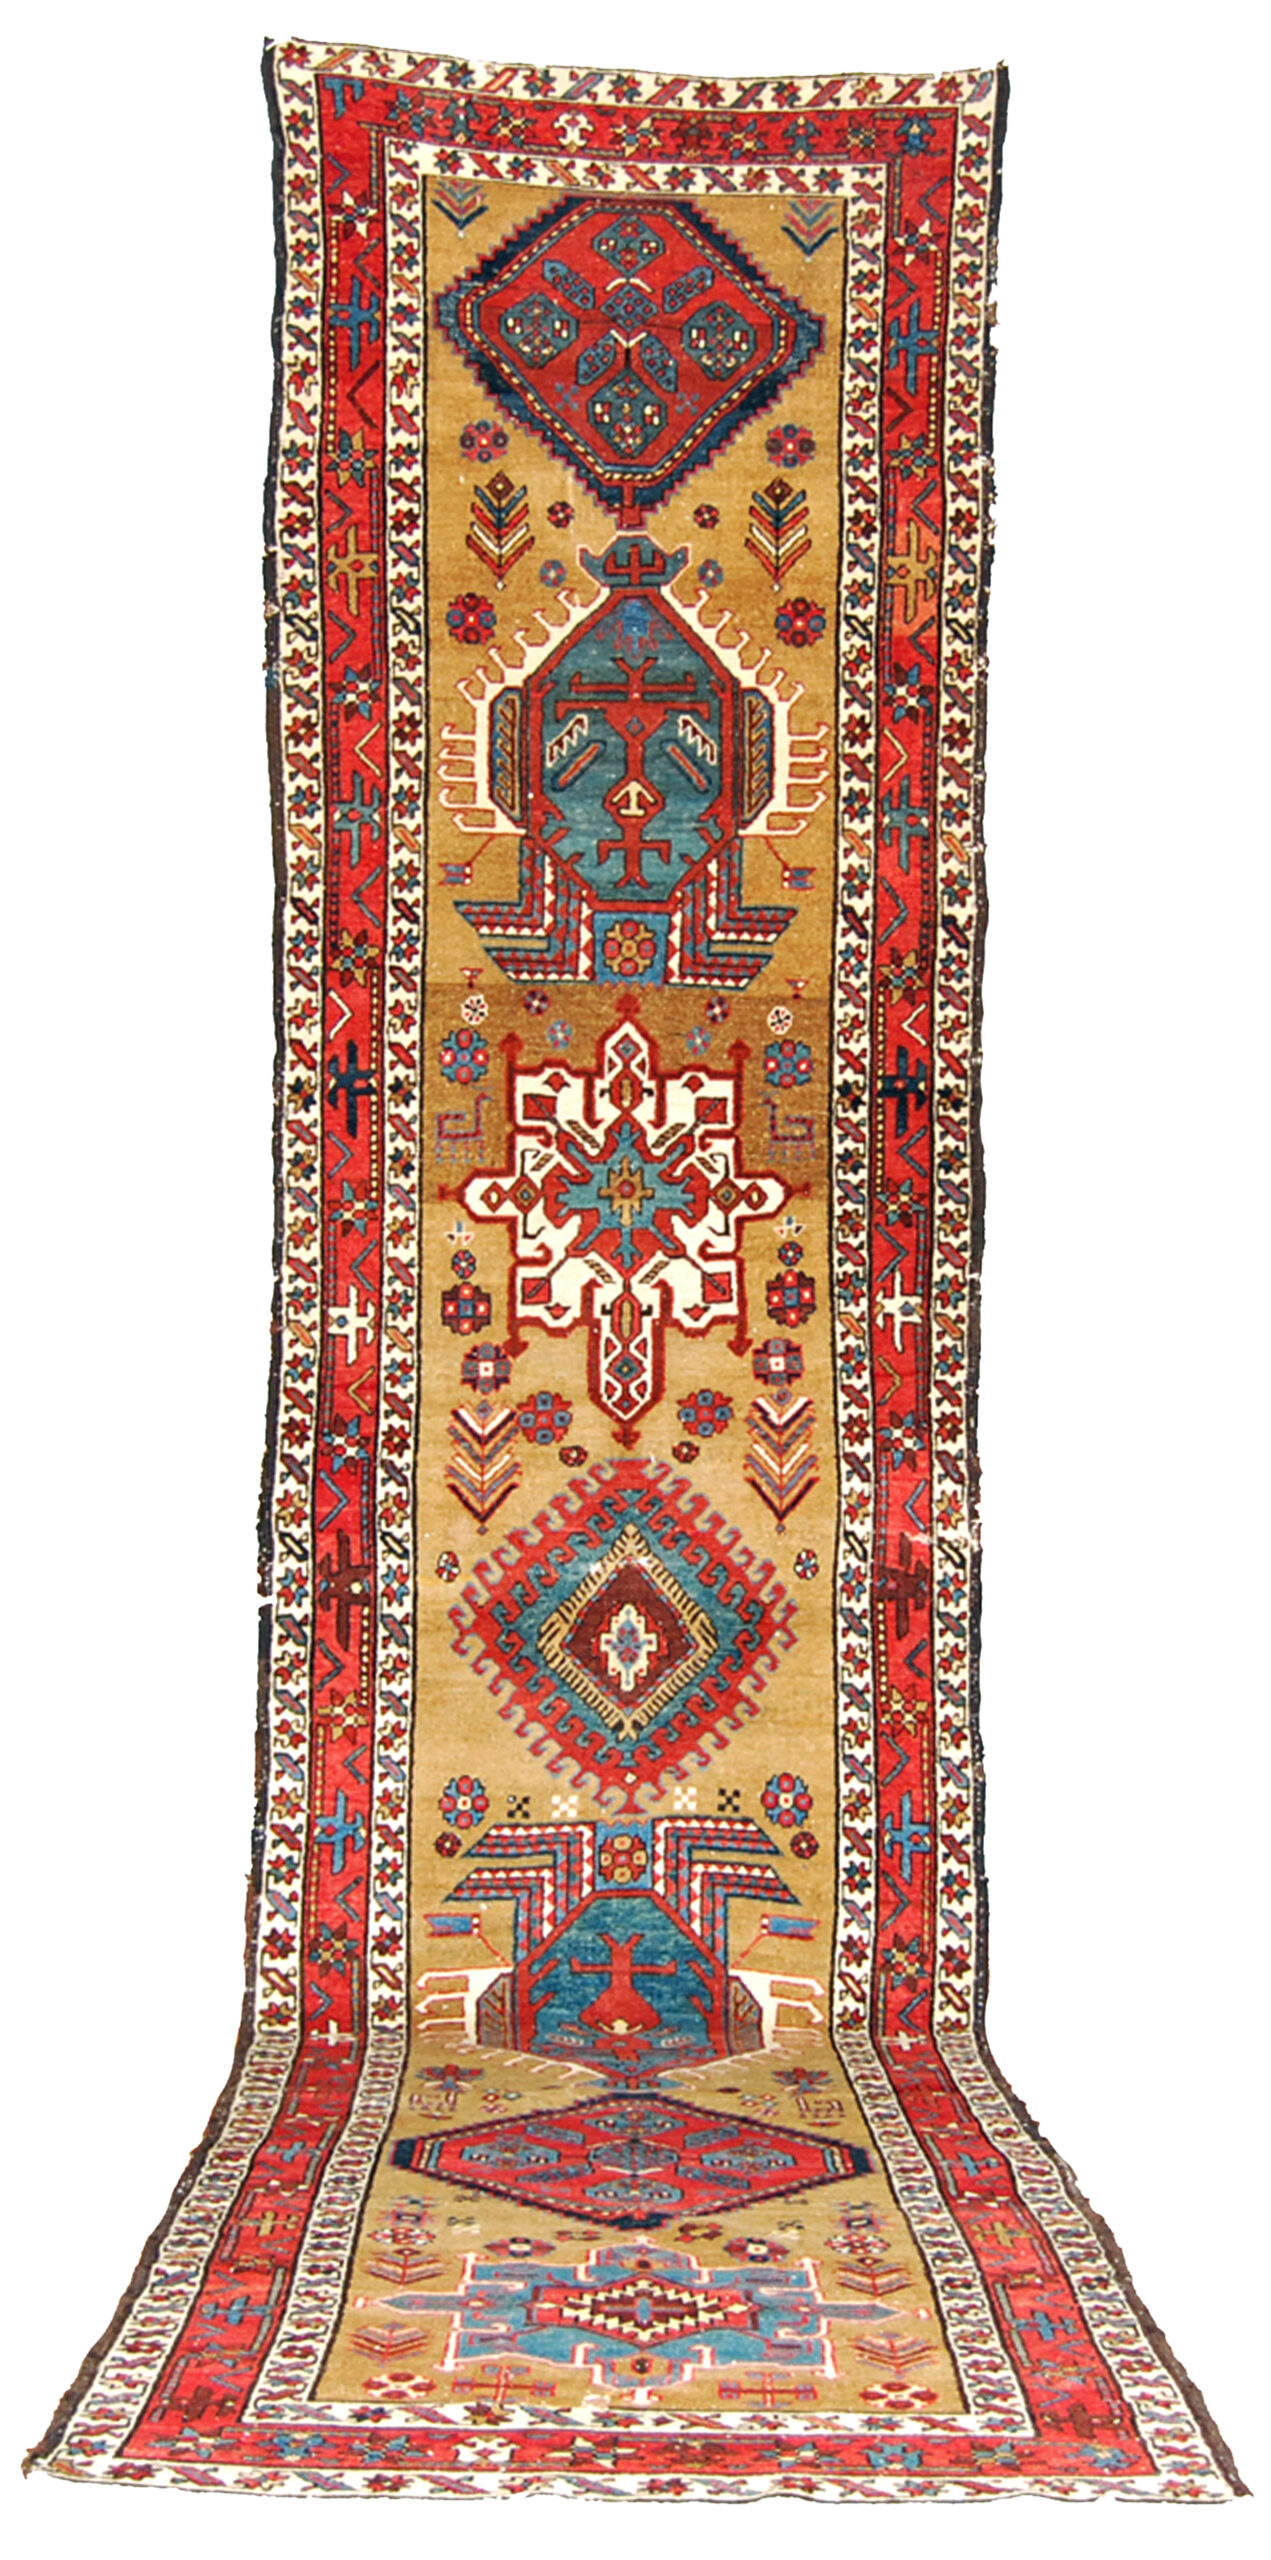 Antique northwest Persian Heriz "Serapi" runner rug with yellow-camel color field, Douglas Stock Gallery, antique rugs Boston,MA area, antique runner rugs, antique Heriz rugs, antique Oriental rugs New England